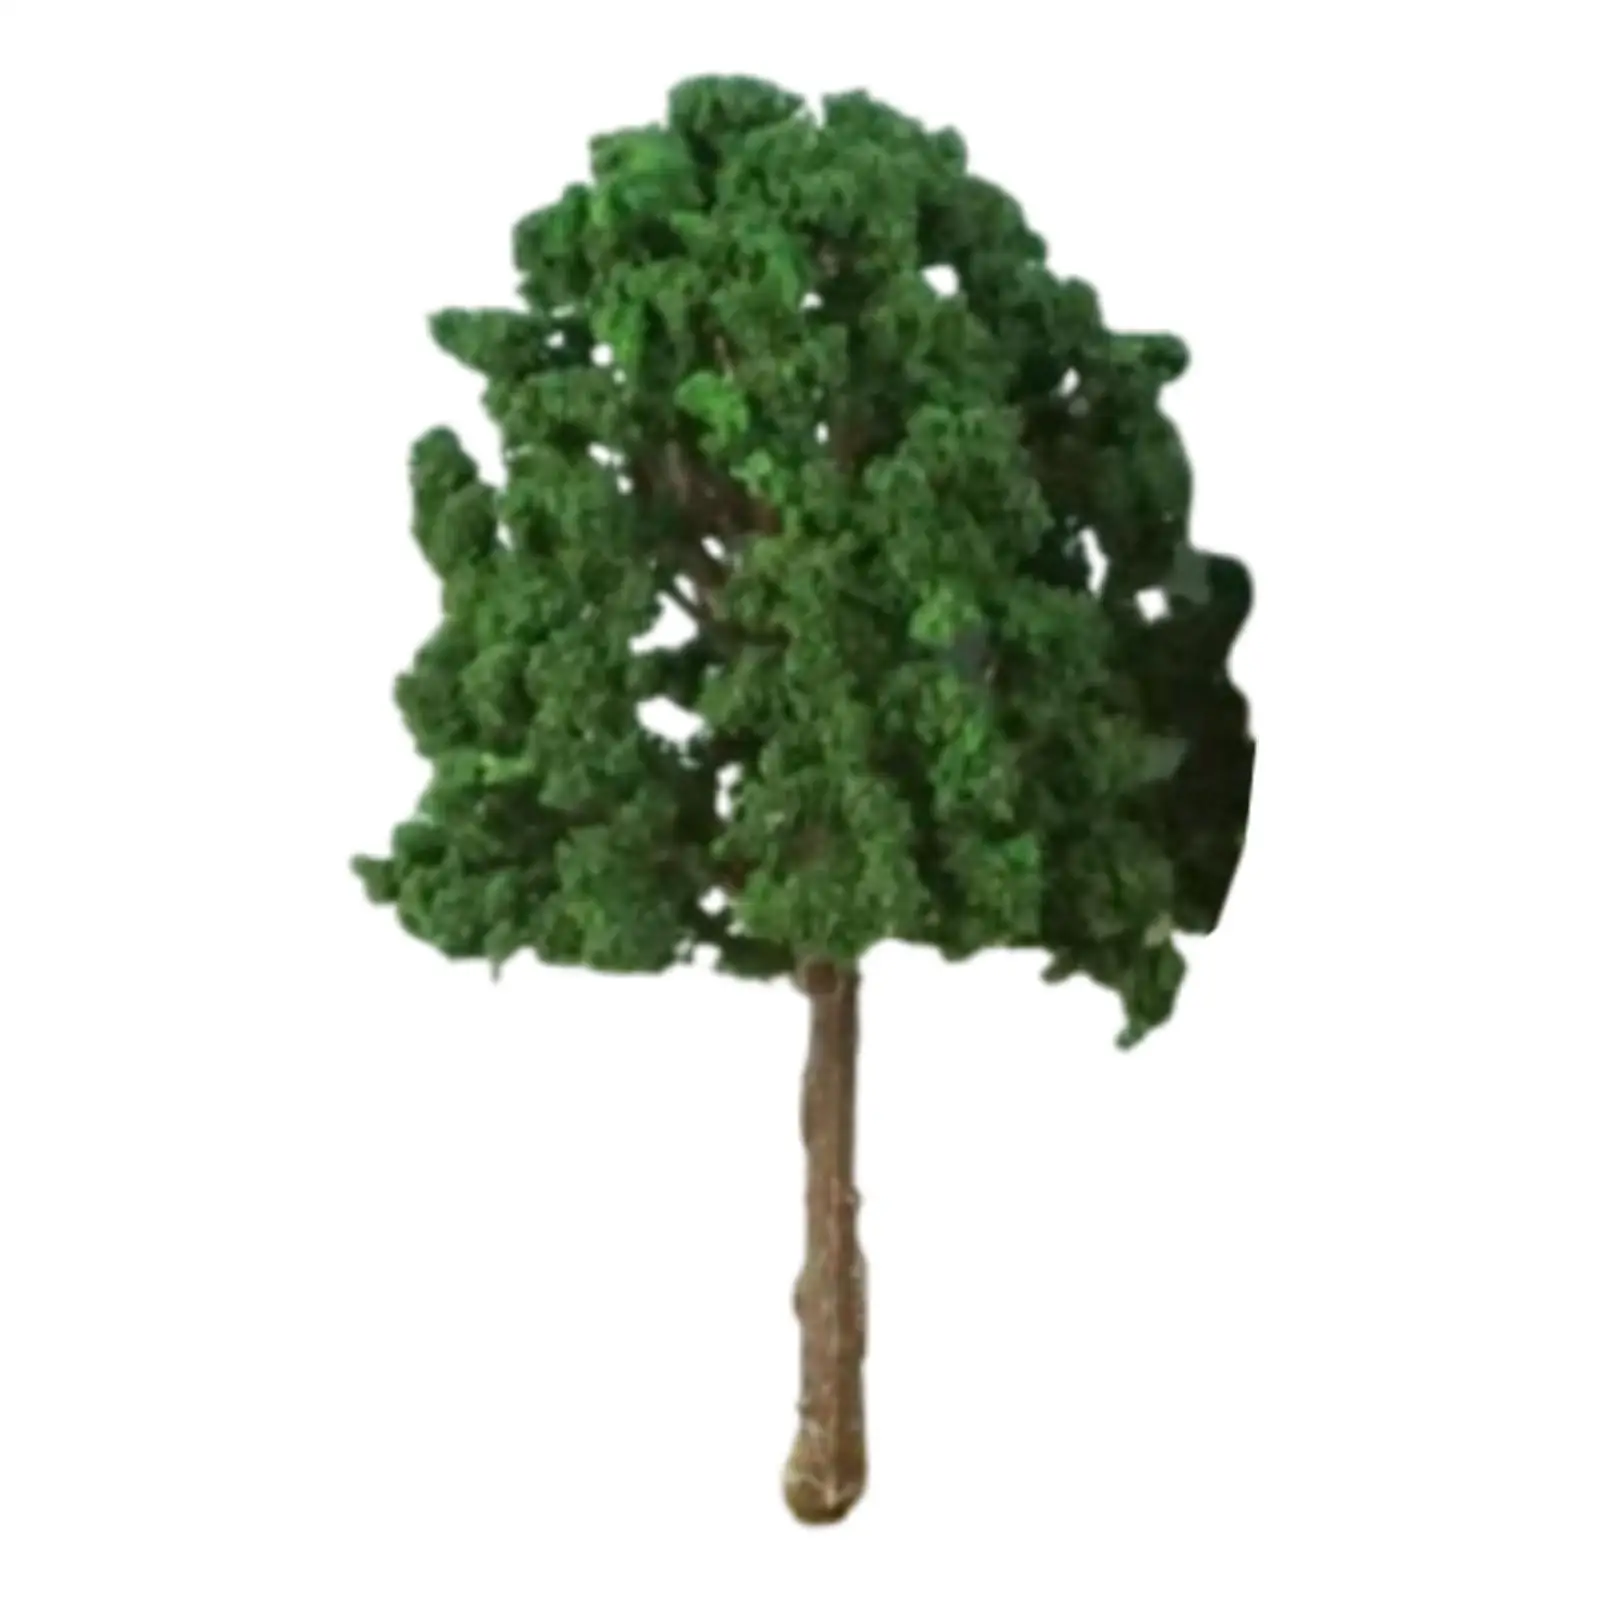 20 Pieces Model Trees Props Miniature Trees Train Scenery Architecture Trees for Building DIY Projects Scene Dollhouse Landscape